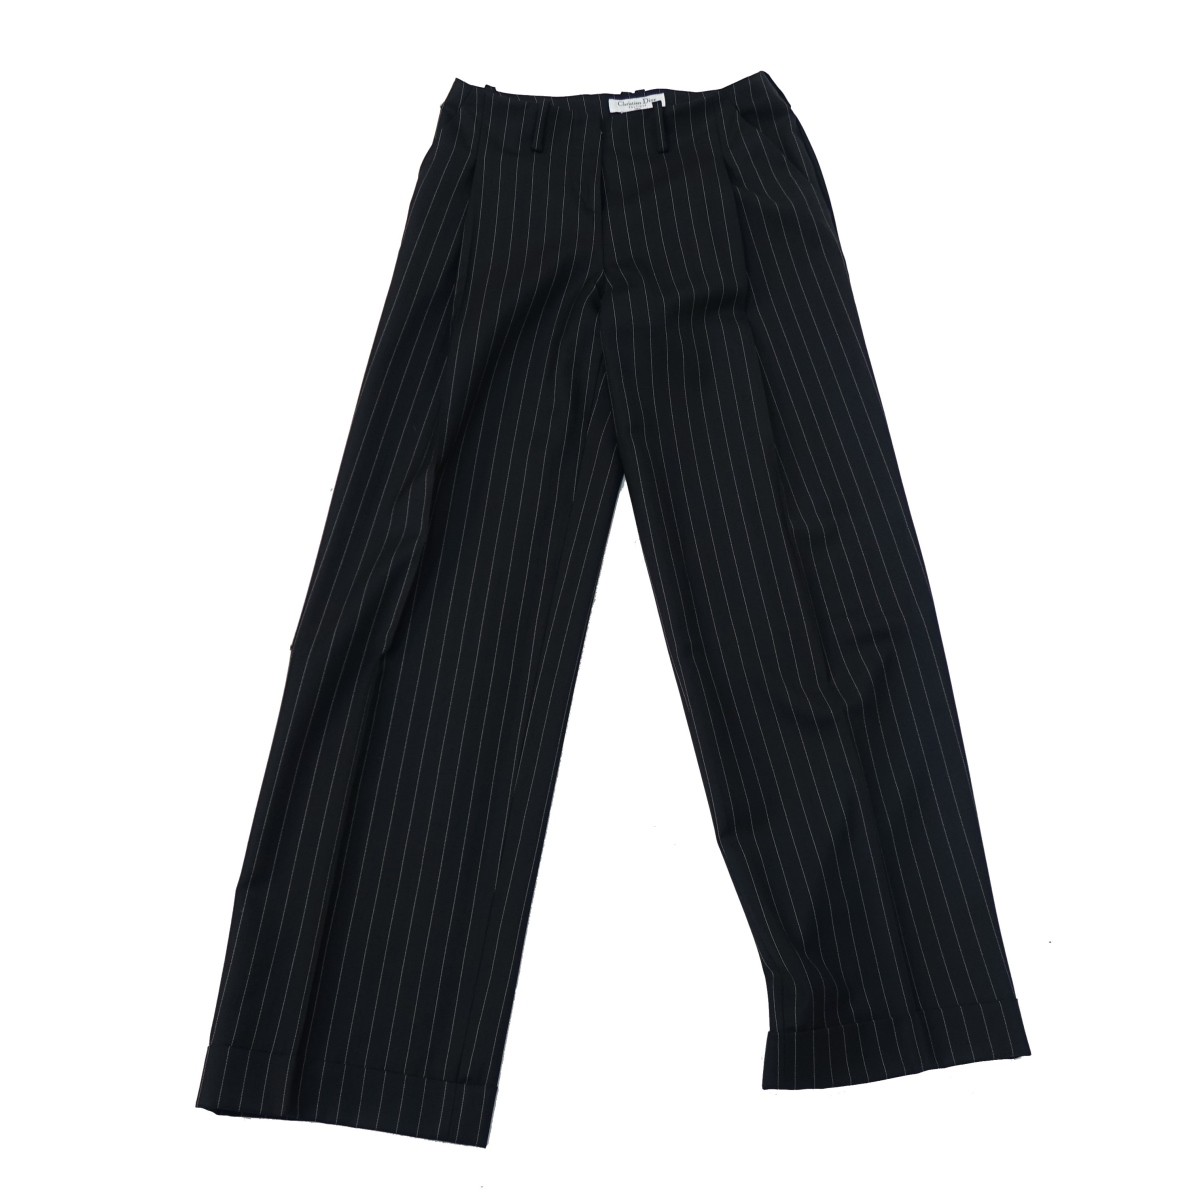 Christian Dior Pin Stripe Pants | Kodner Auctions